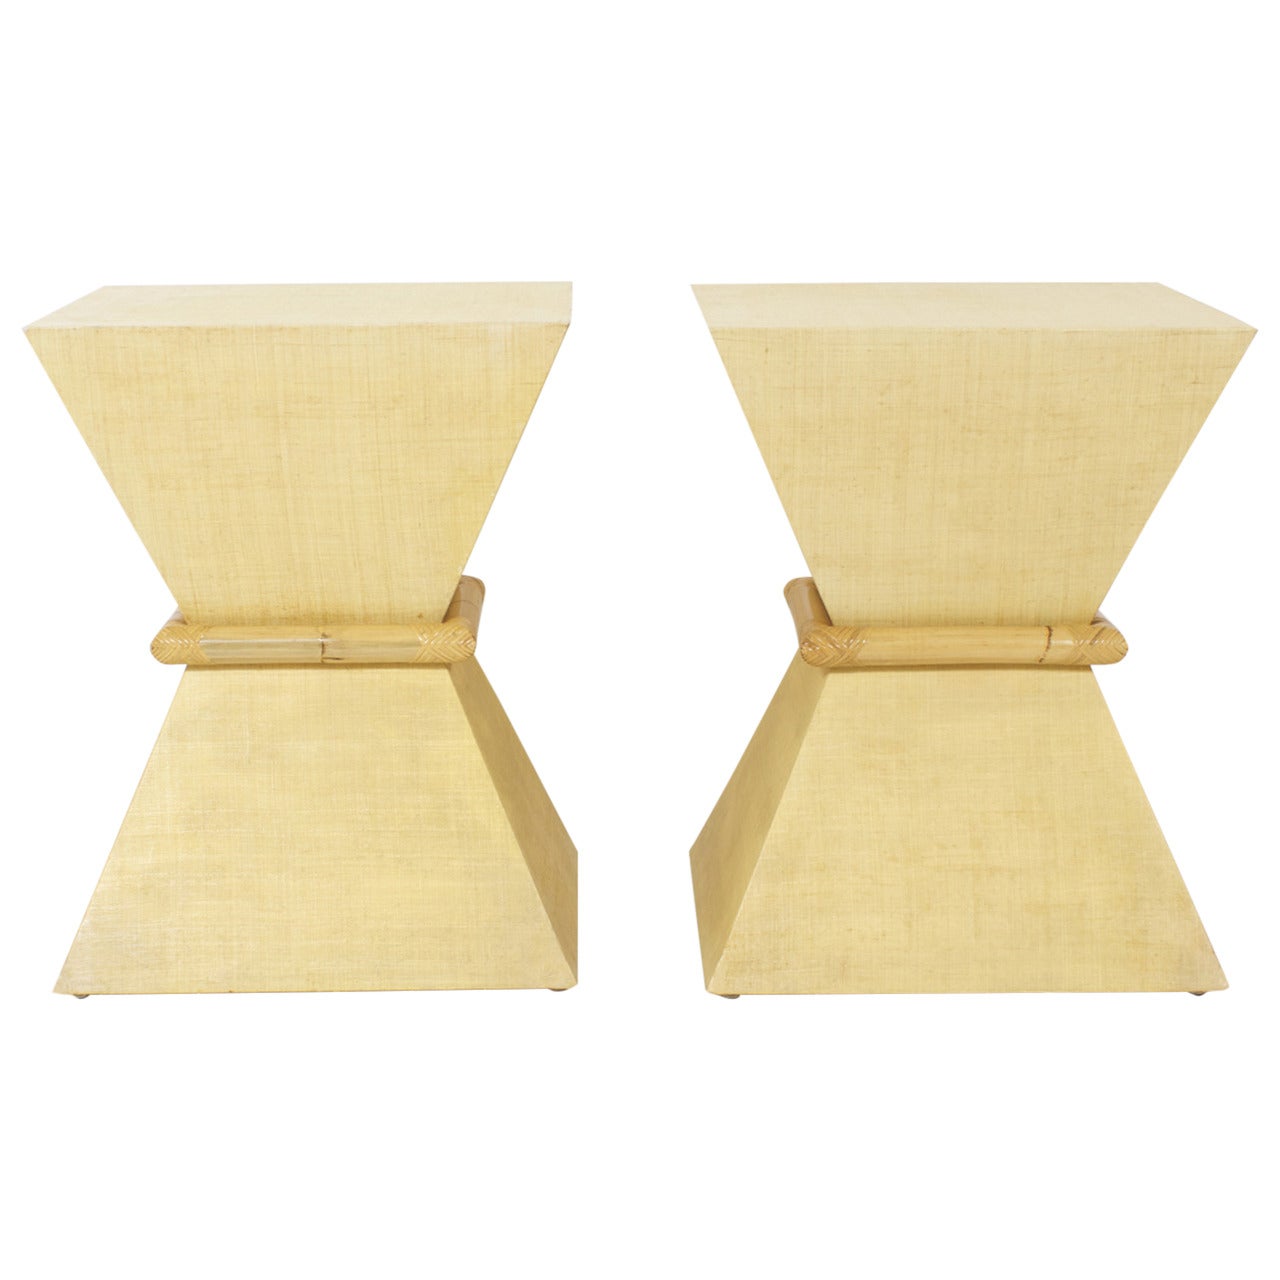 Pair of Mid-Century Modern Linen Wrapped Stands or Tables